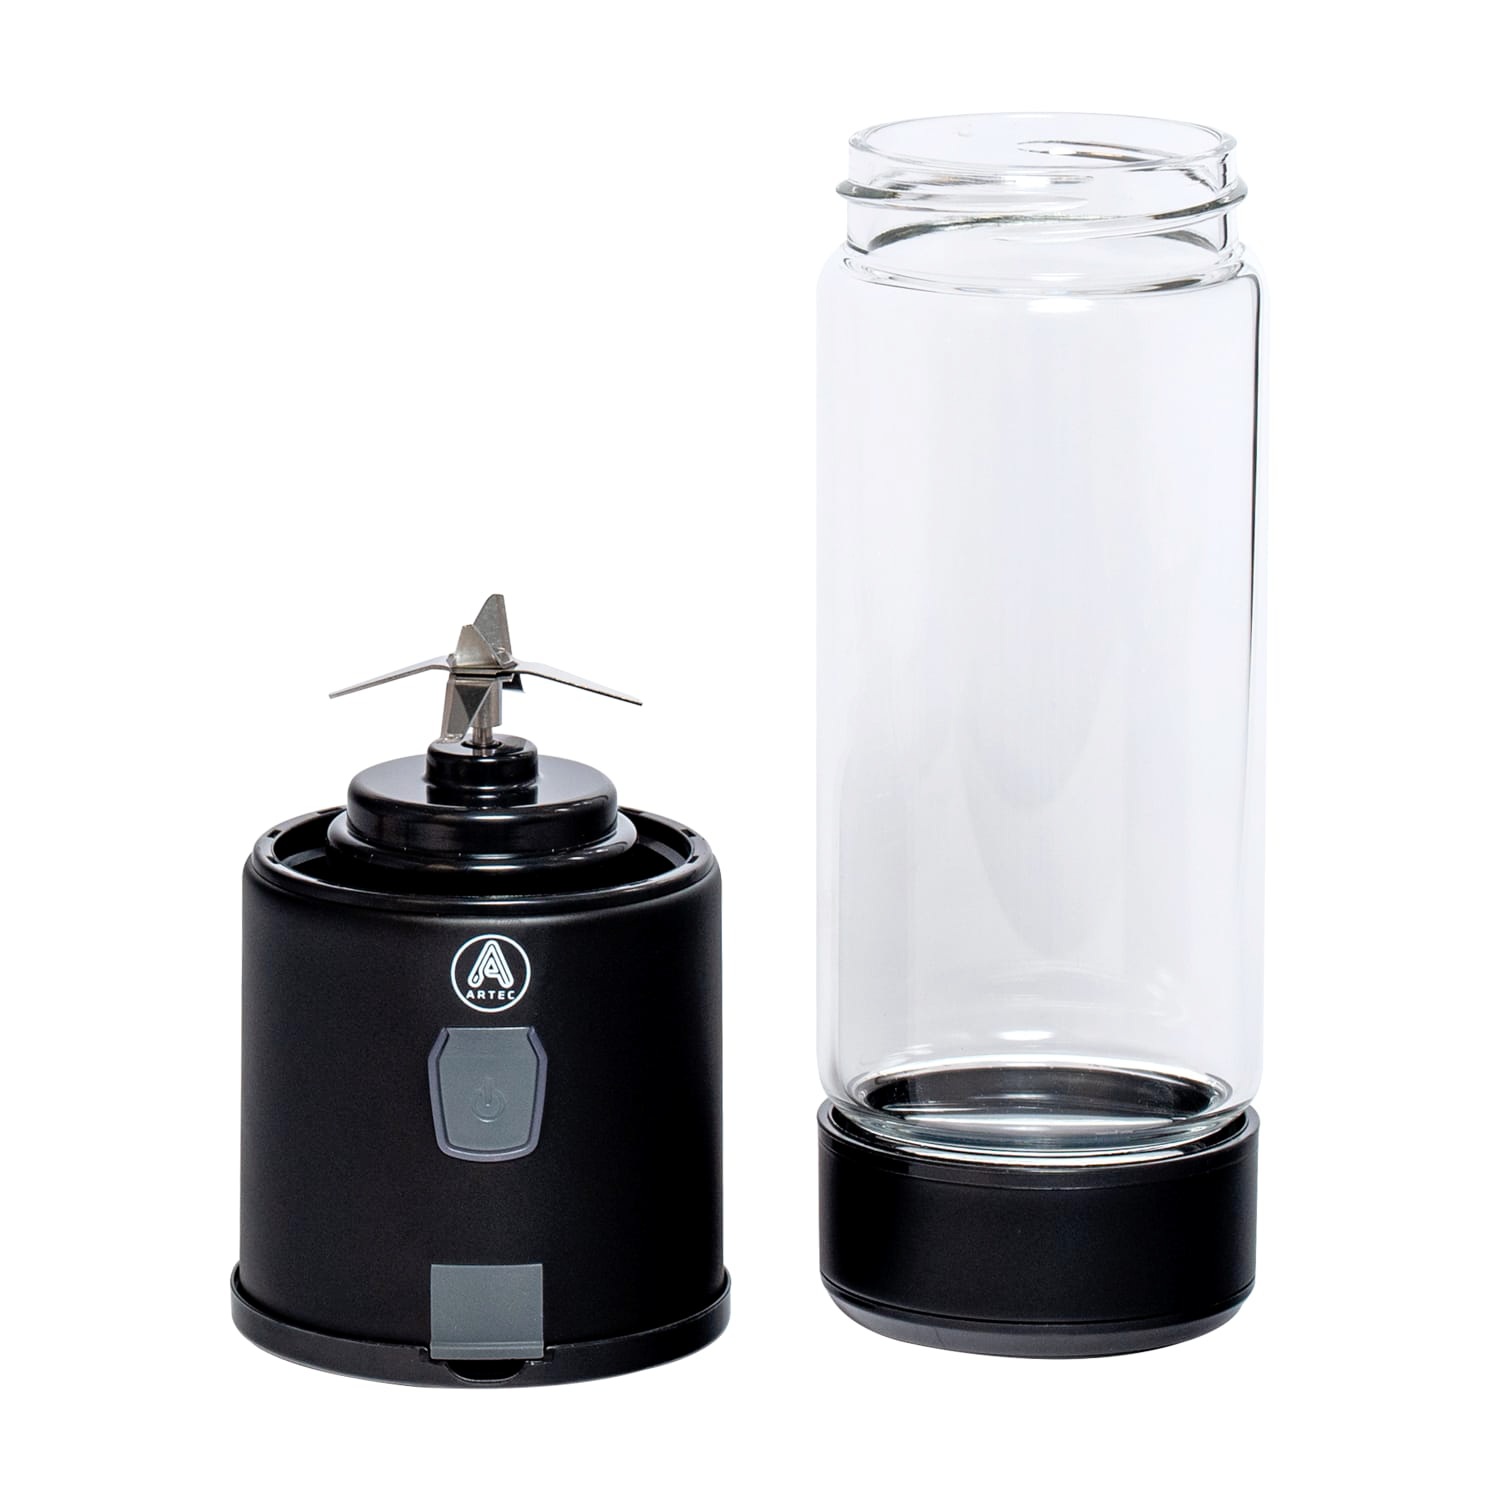 Portable blender with USB power supply.